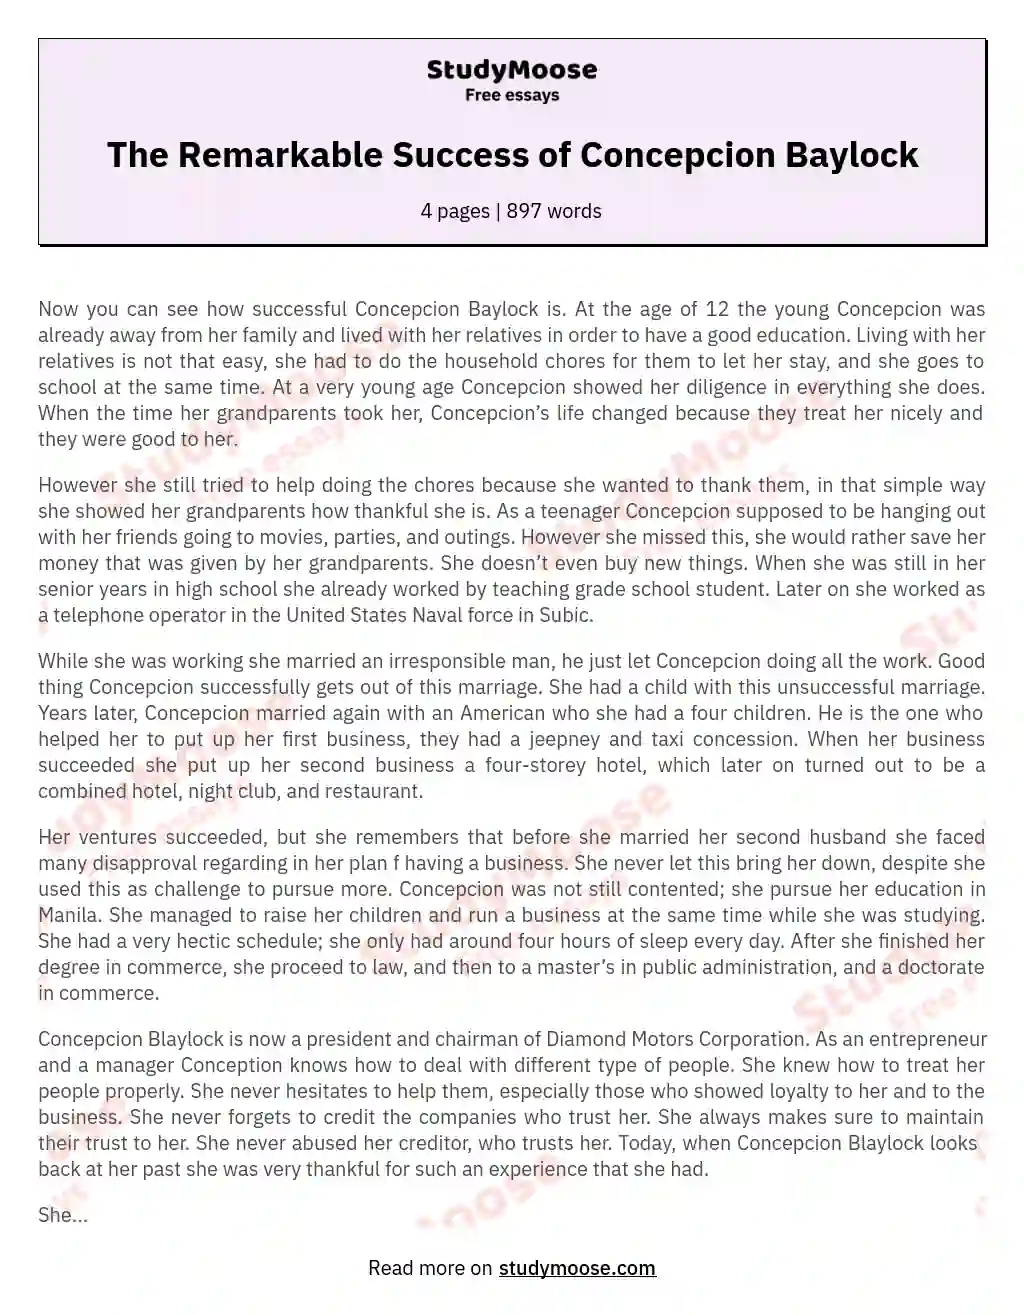 The Remarkable Success of Concepcion Baylock essay